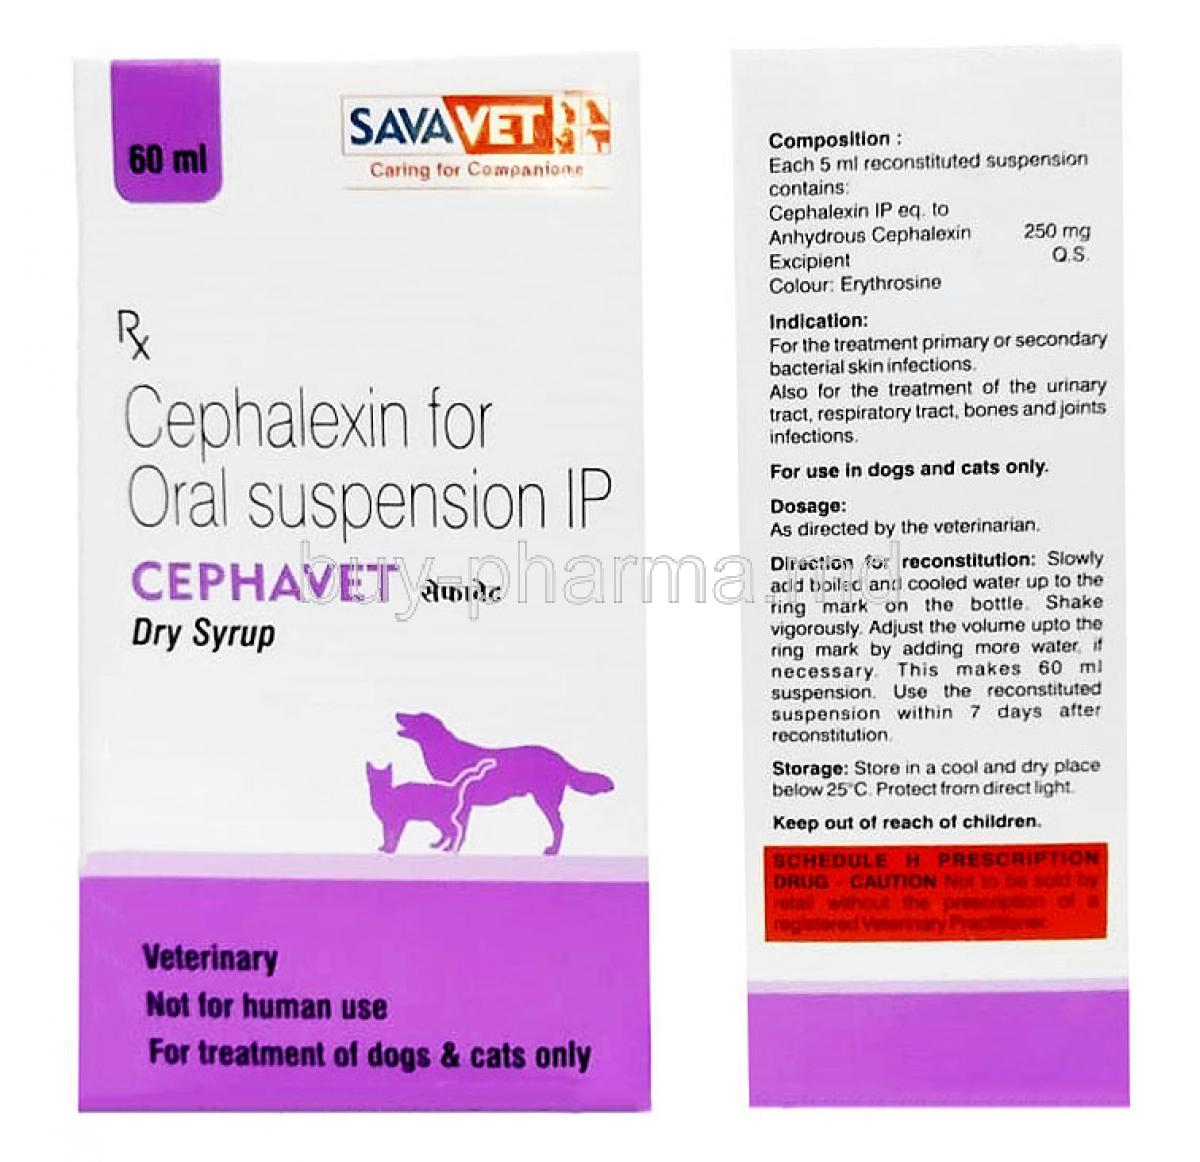 Cephavet Dry Syrup, Cephalexin　250 mg per 5mL, Dry Syrup 60mL, Sava Vet, Box, front view, Back view information